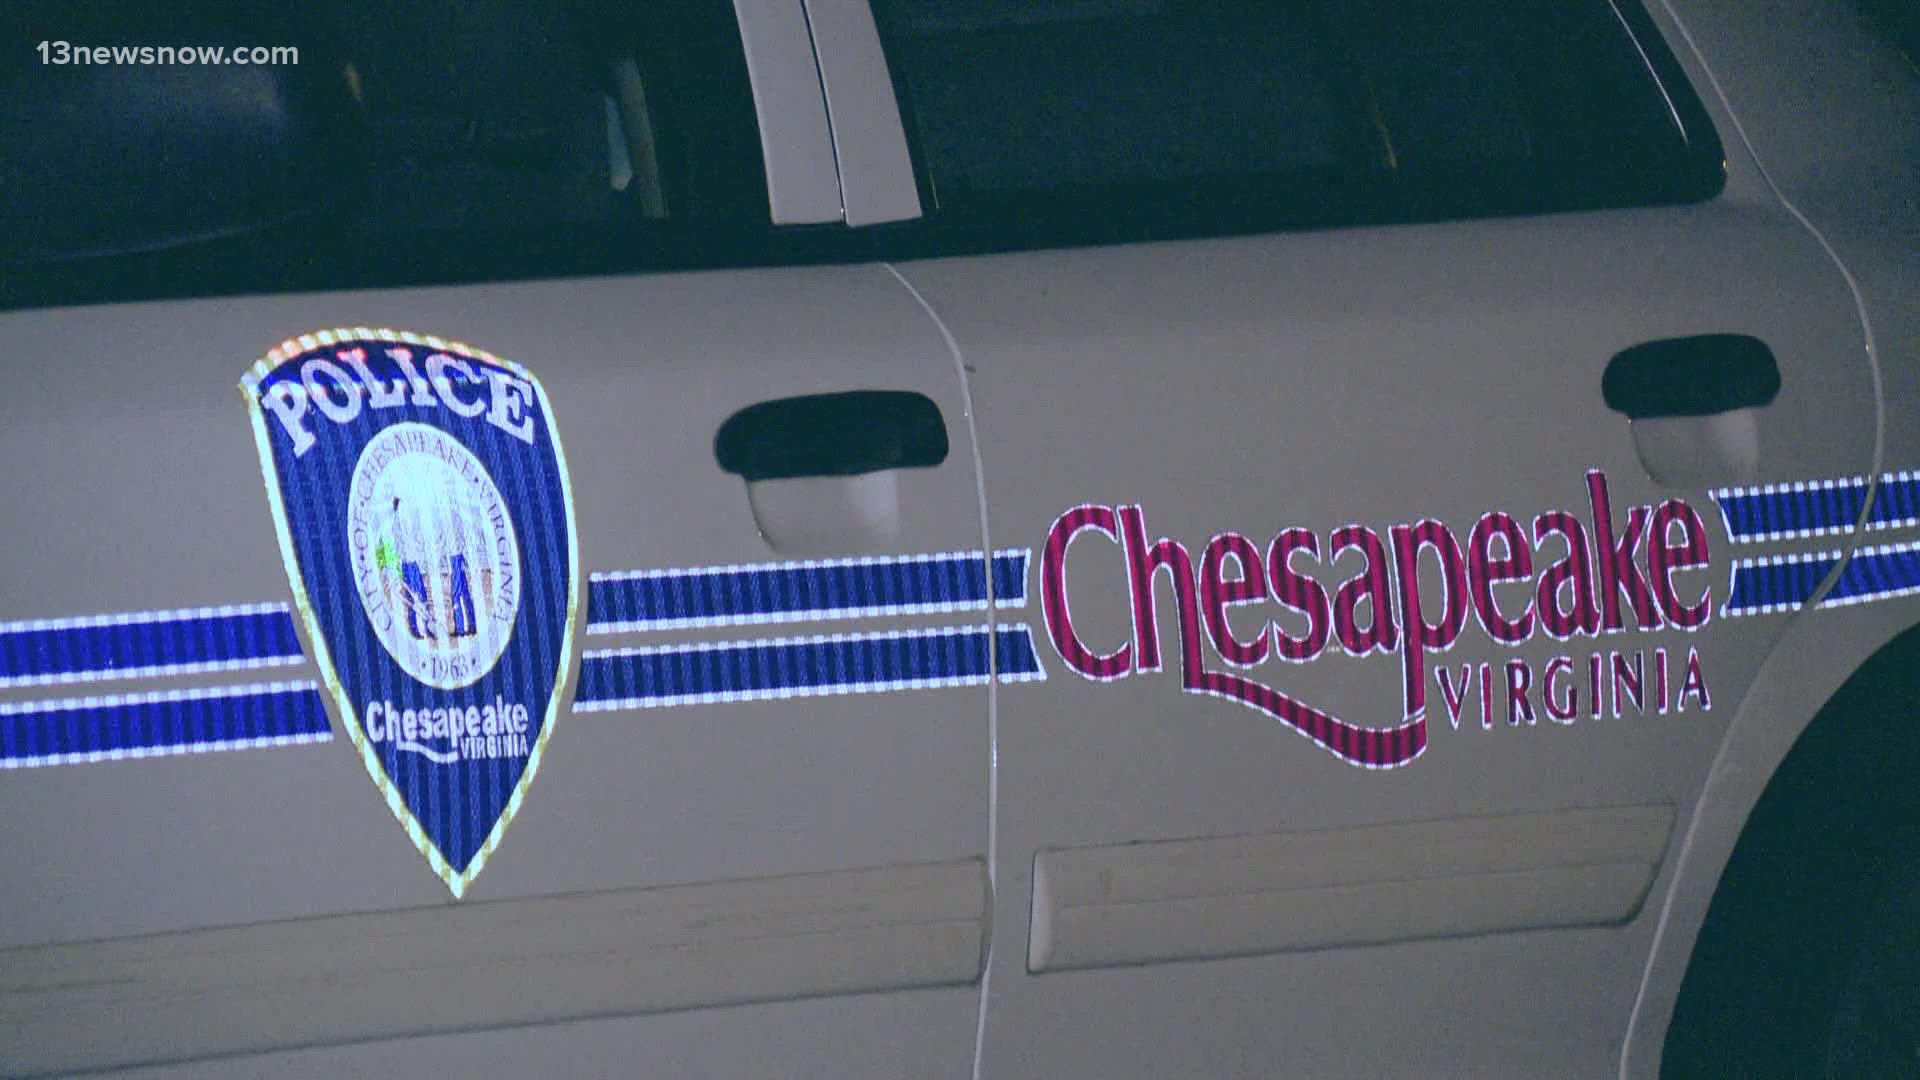 The police had pursued the suspect all the way from Chesapeake when he refused to stop after a traffic violation